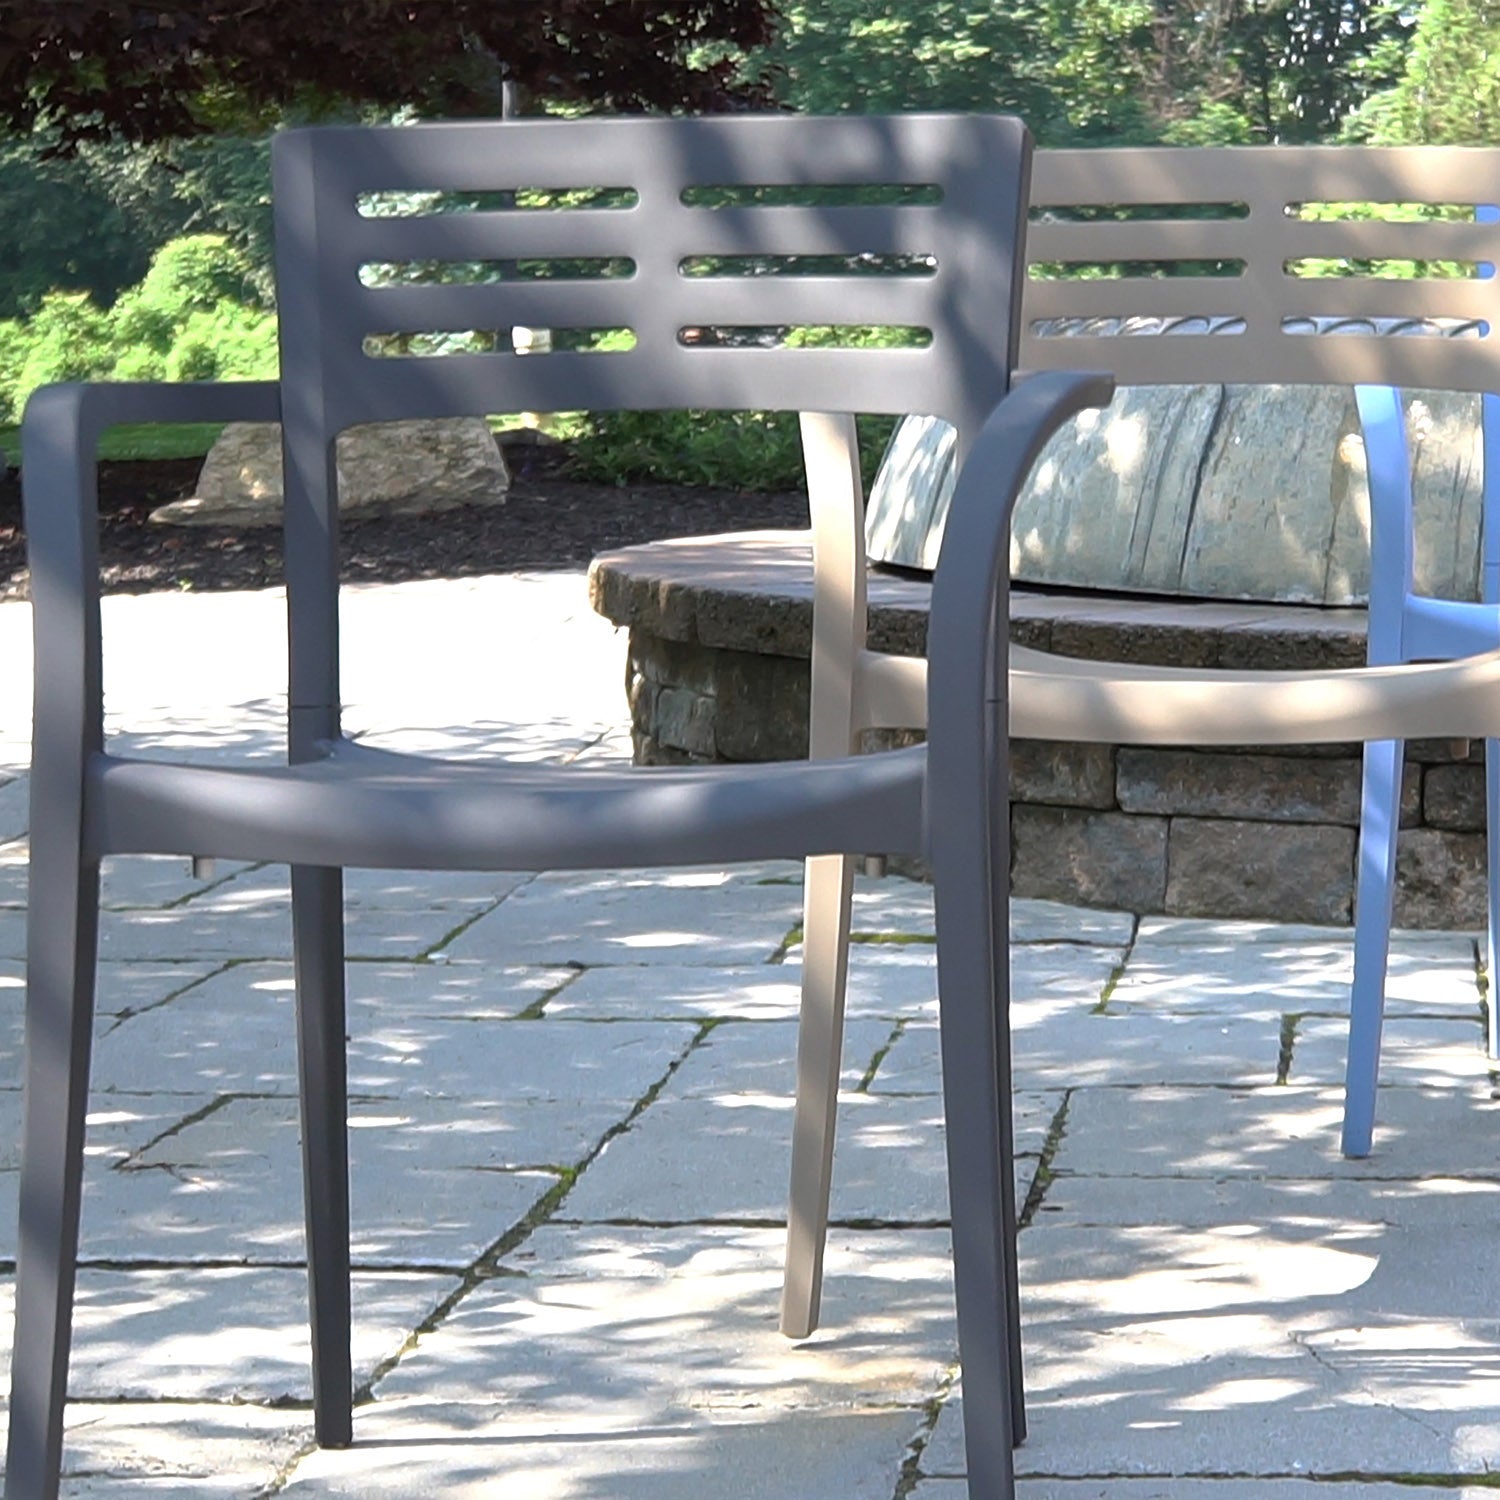 Top Features to Consider When Buying Outdoor Dining Chairs